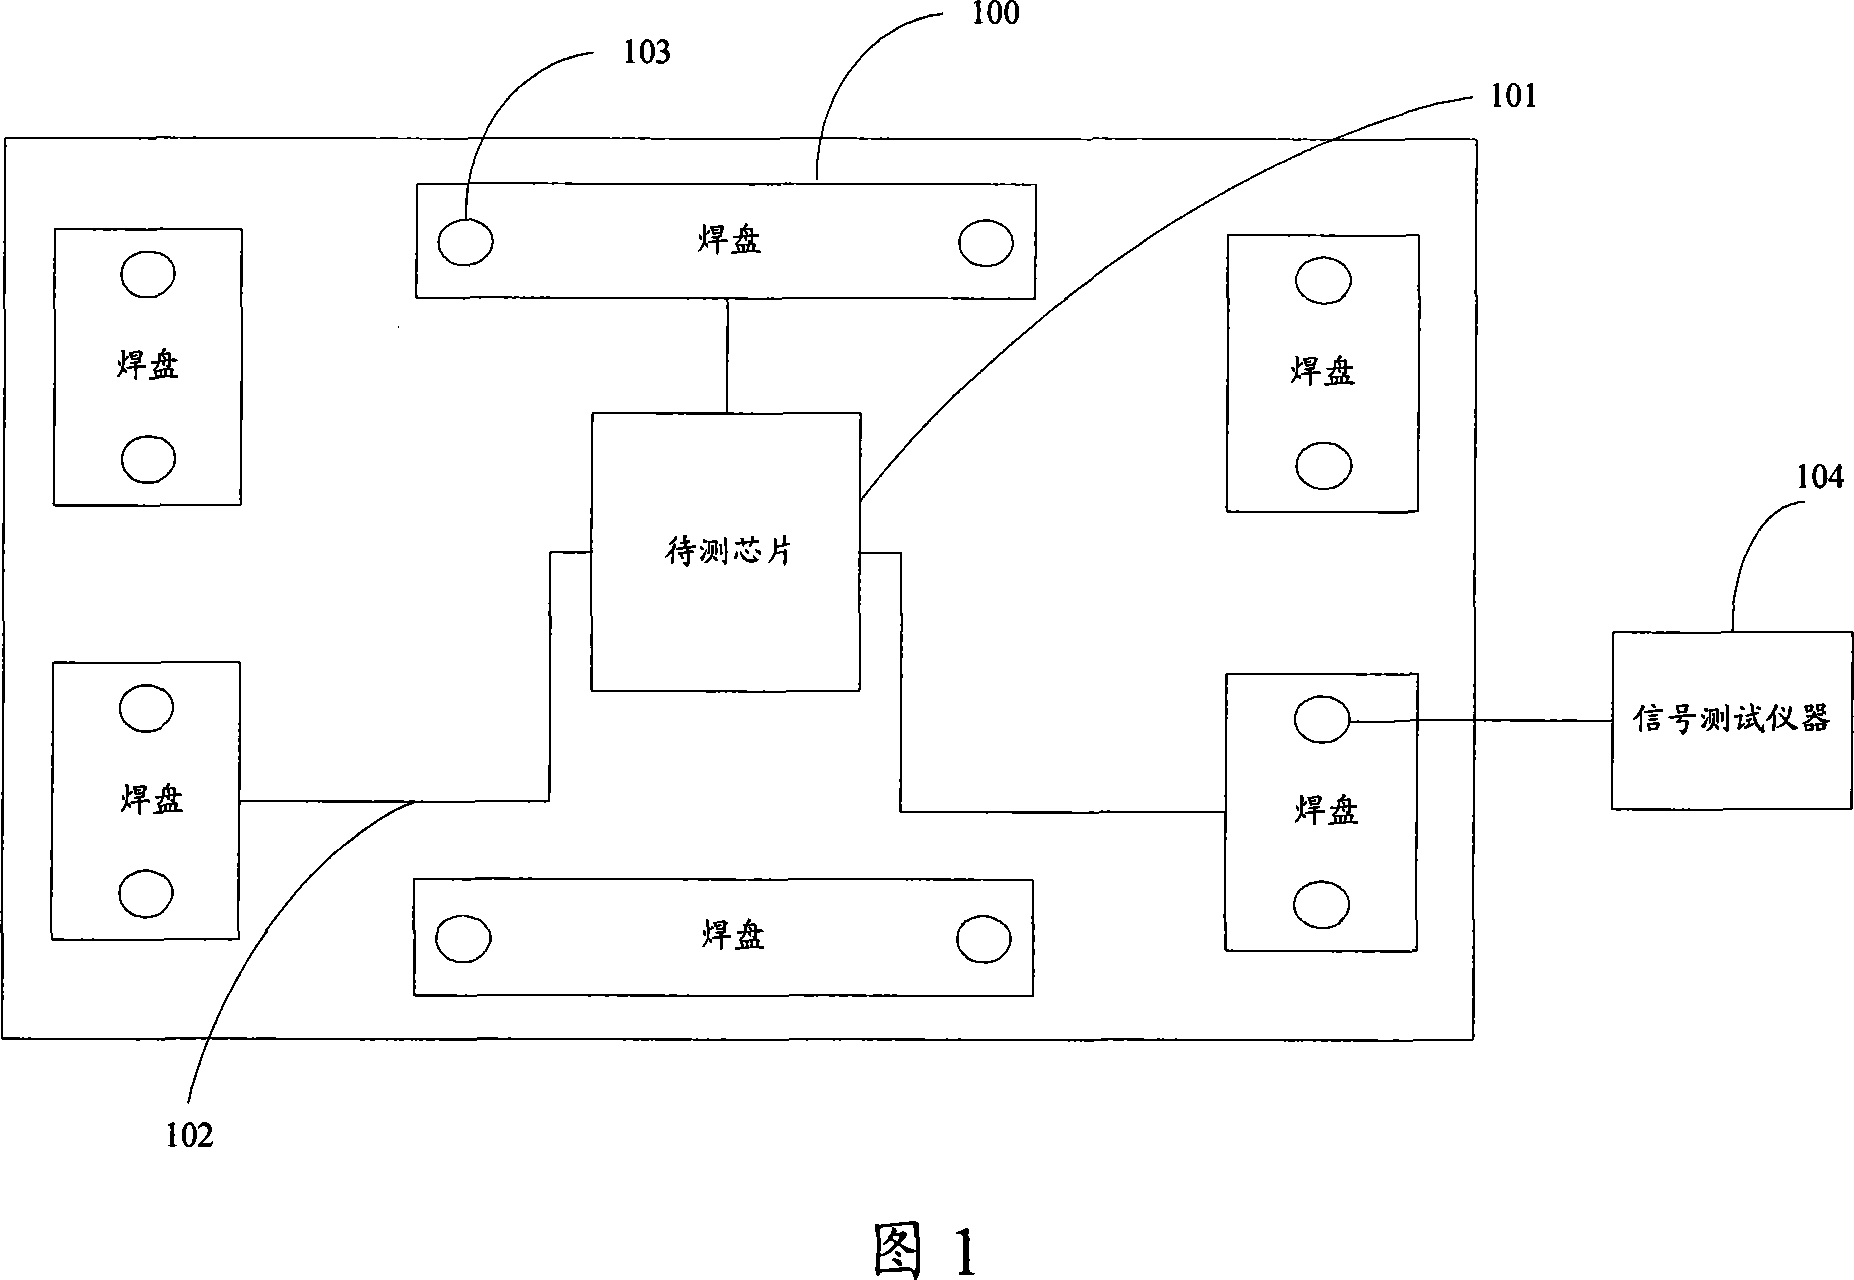 Method and arrangement for implementing chip test